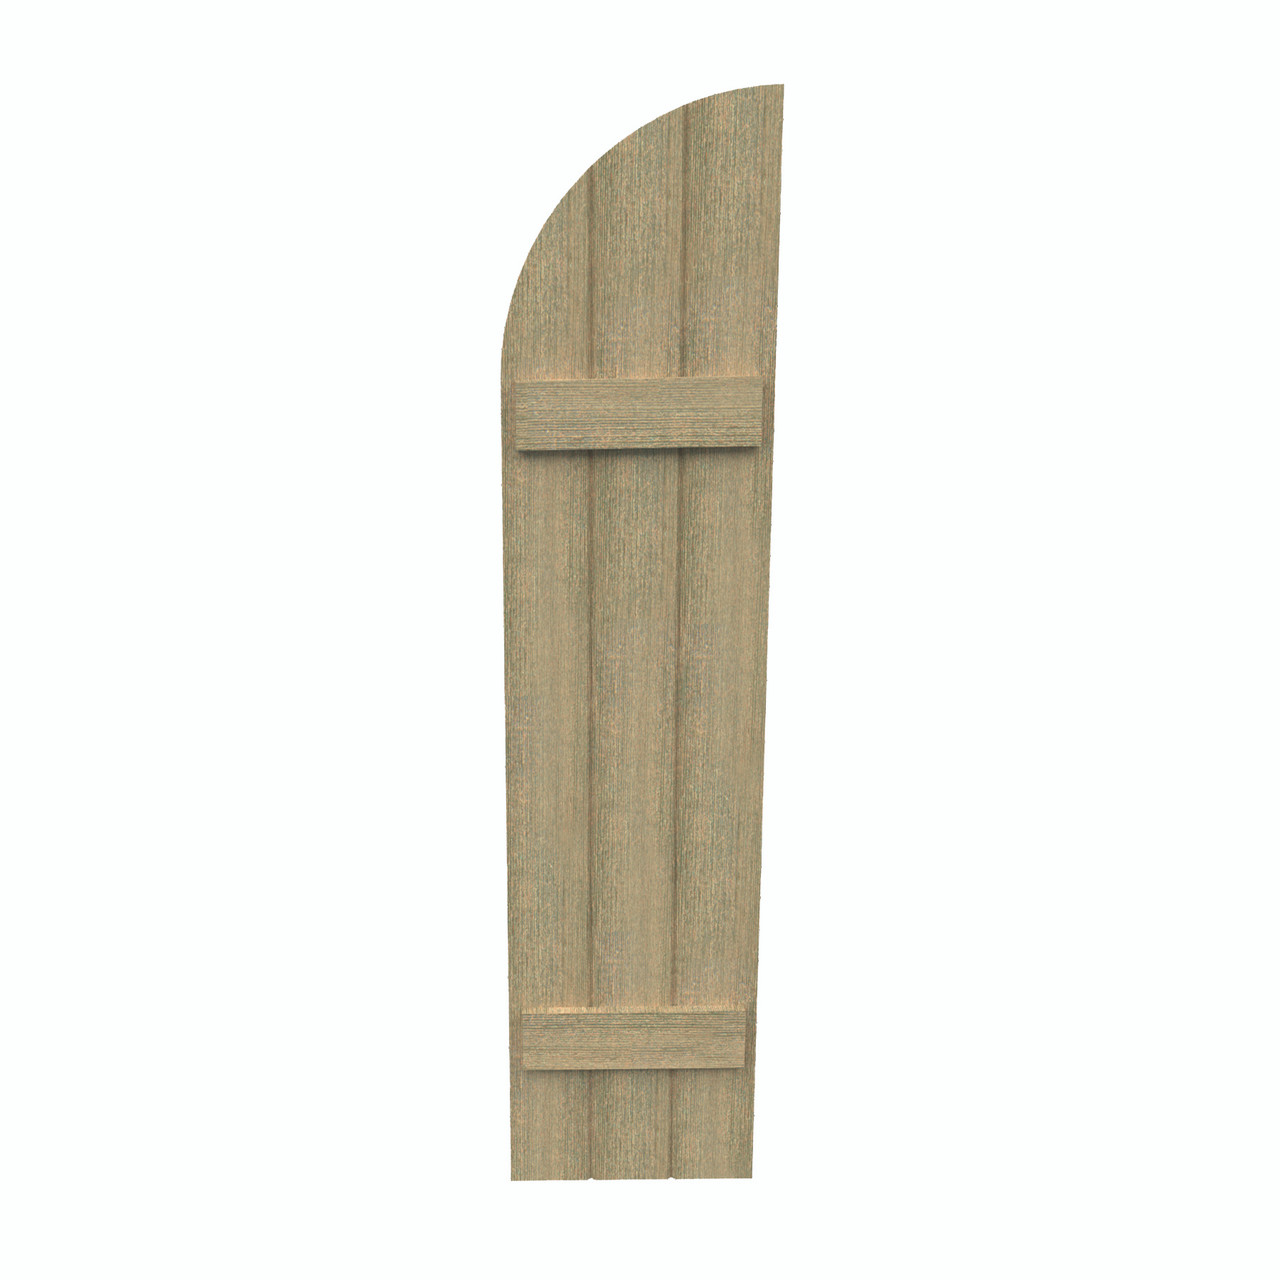 18 inch by 83 inch Quarter Round Shutter with 3-Boards